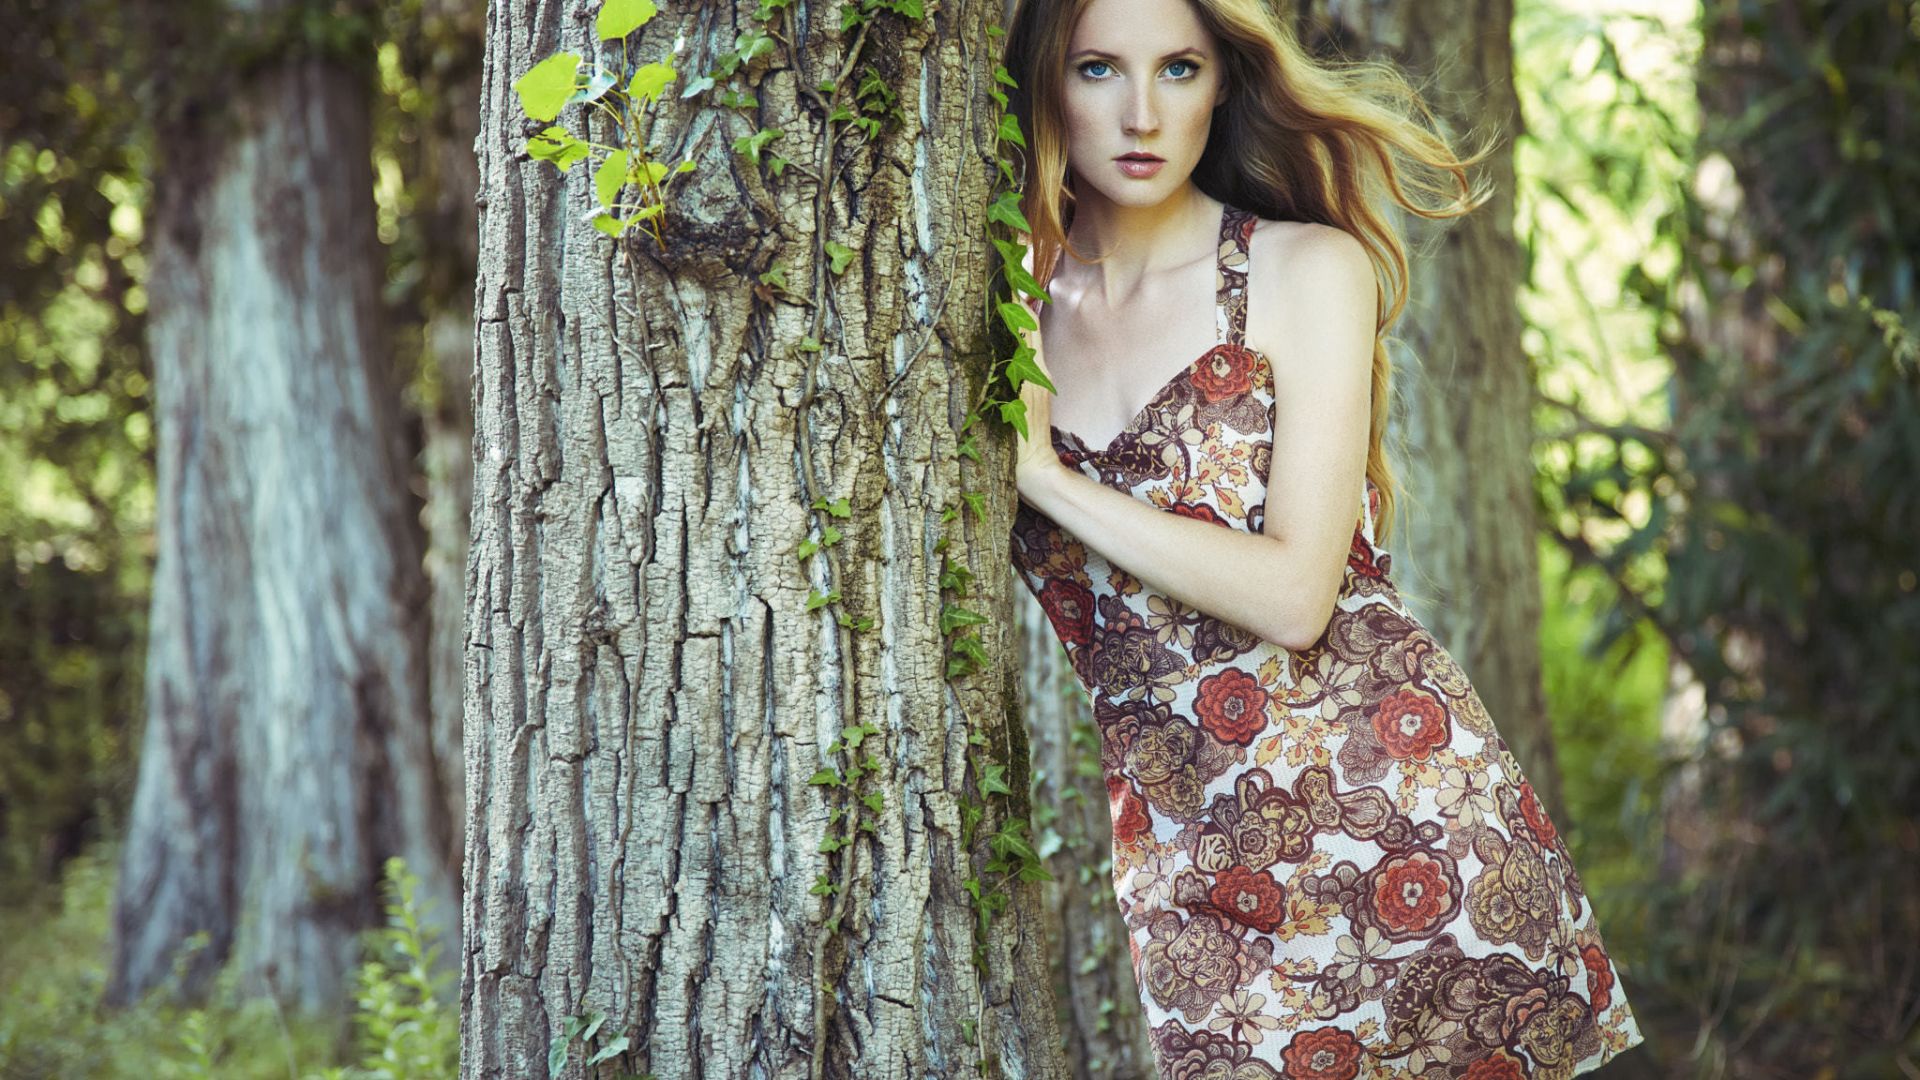 Wallpaper Leaning to tree, girl model, blue eyes, outdoor